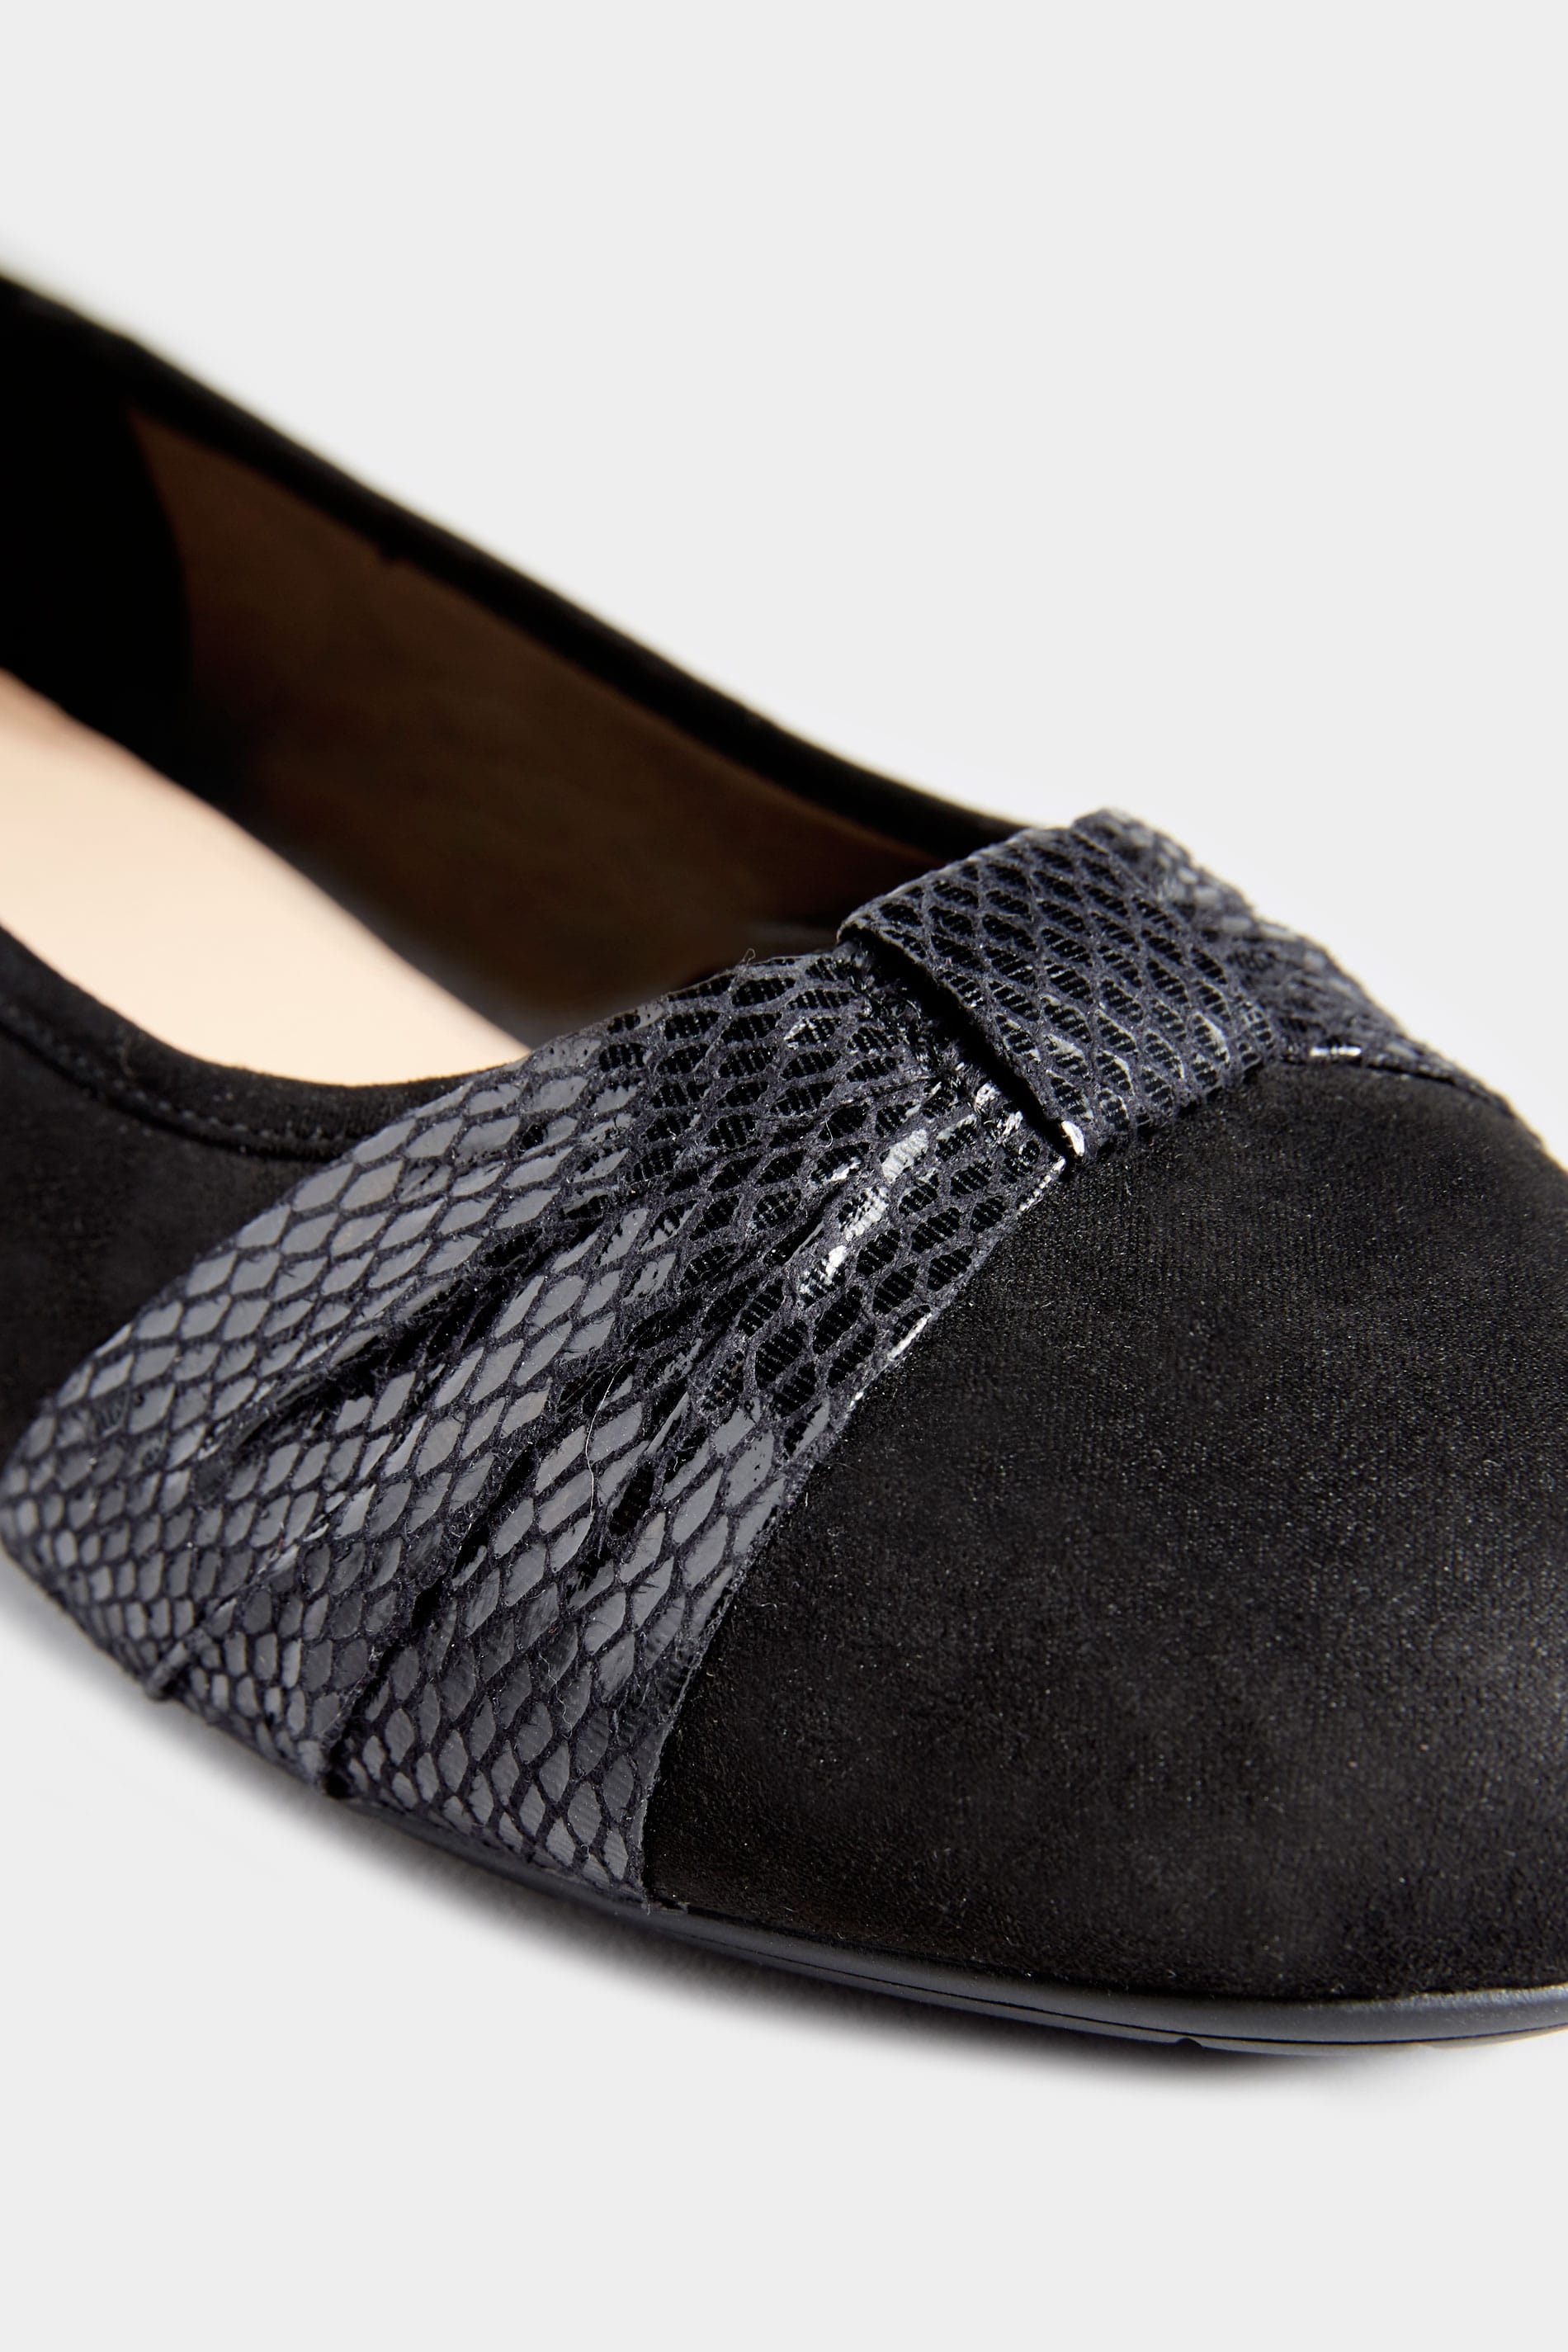 Women/'s Black Ballerina Pumps in Extra Wide Fit Yours